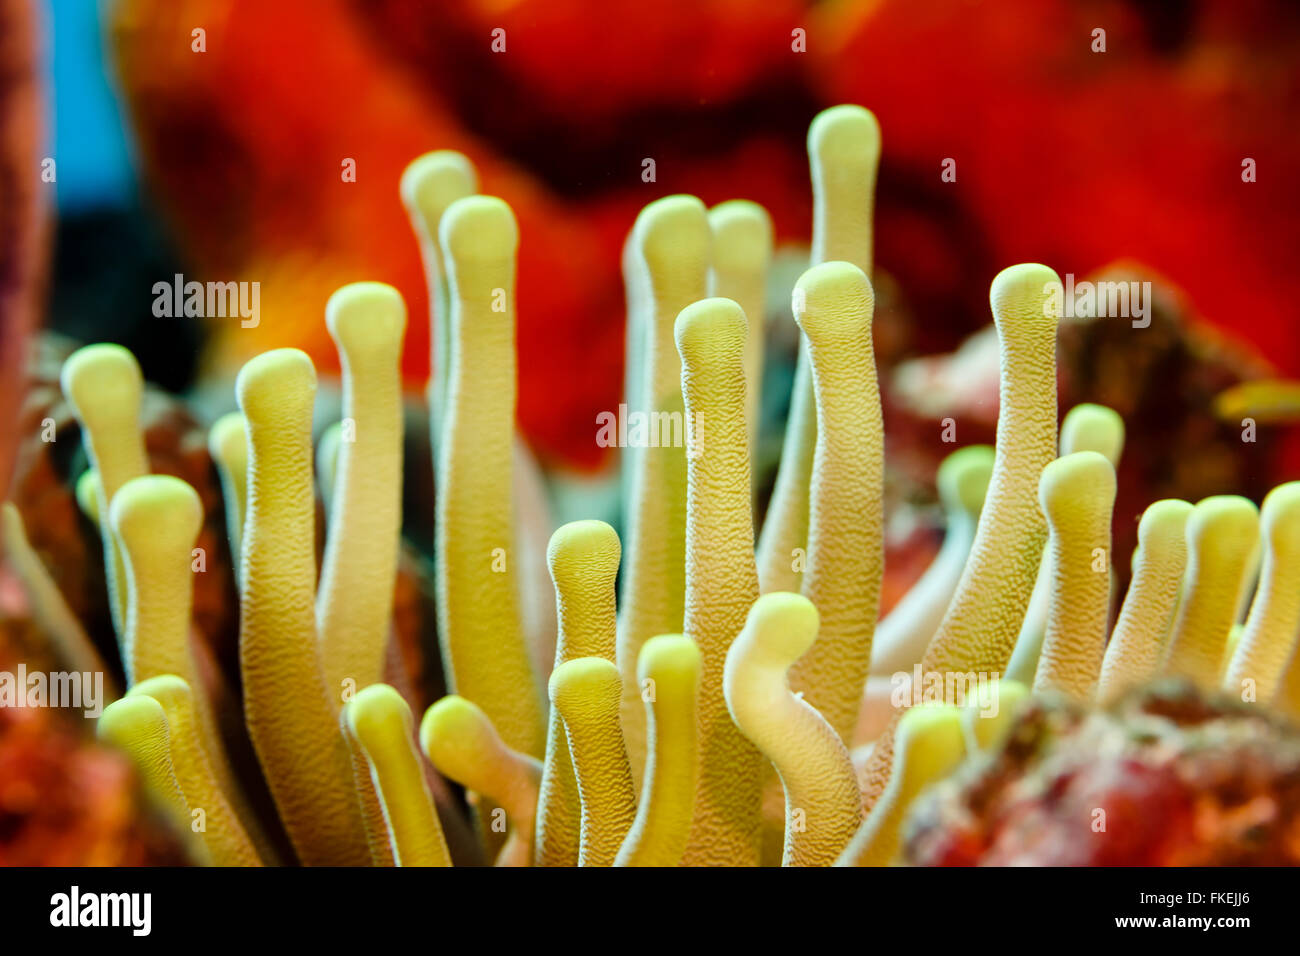 Close-up of open, yellow tentacles strait up, sea anemone, anthozoa actinaria, on the coral reef Stock Photo